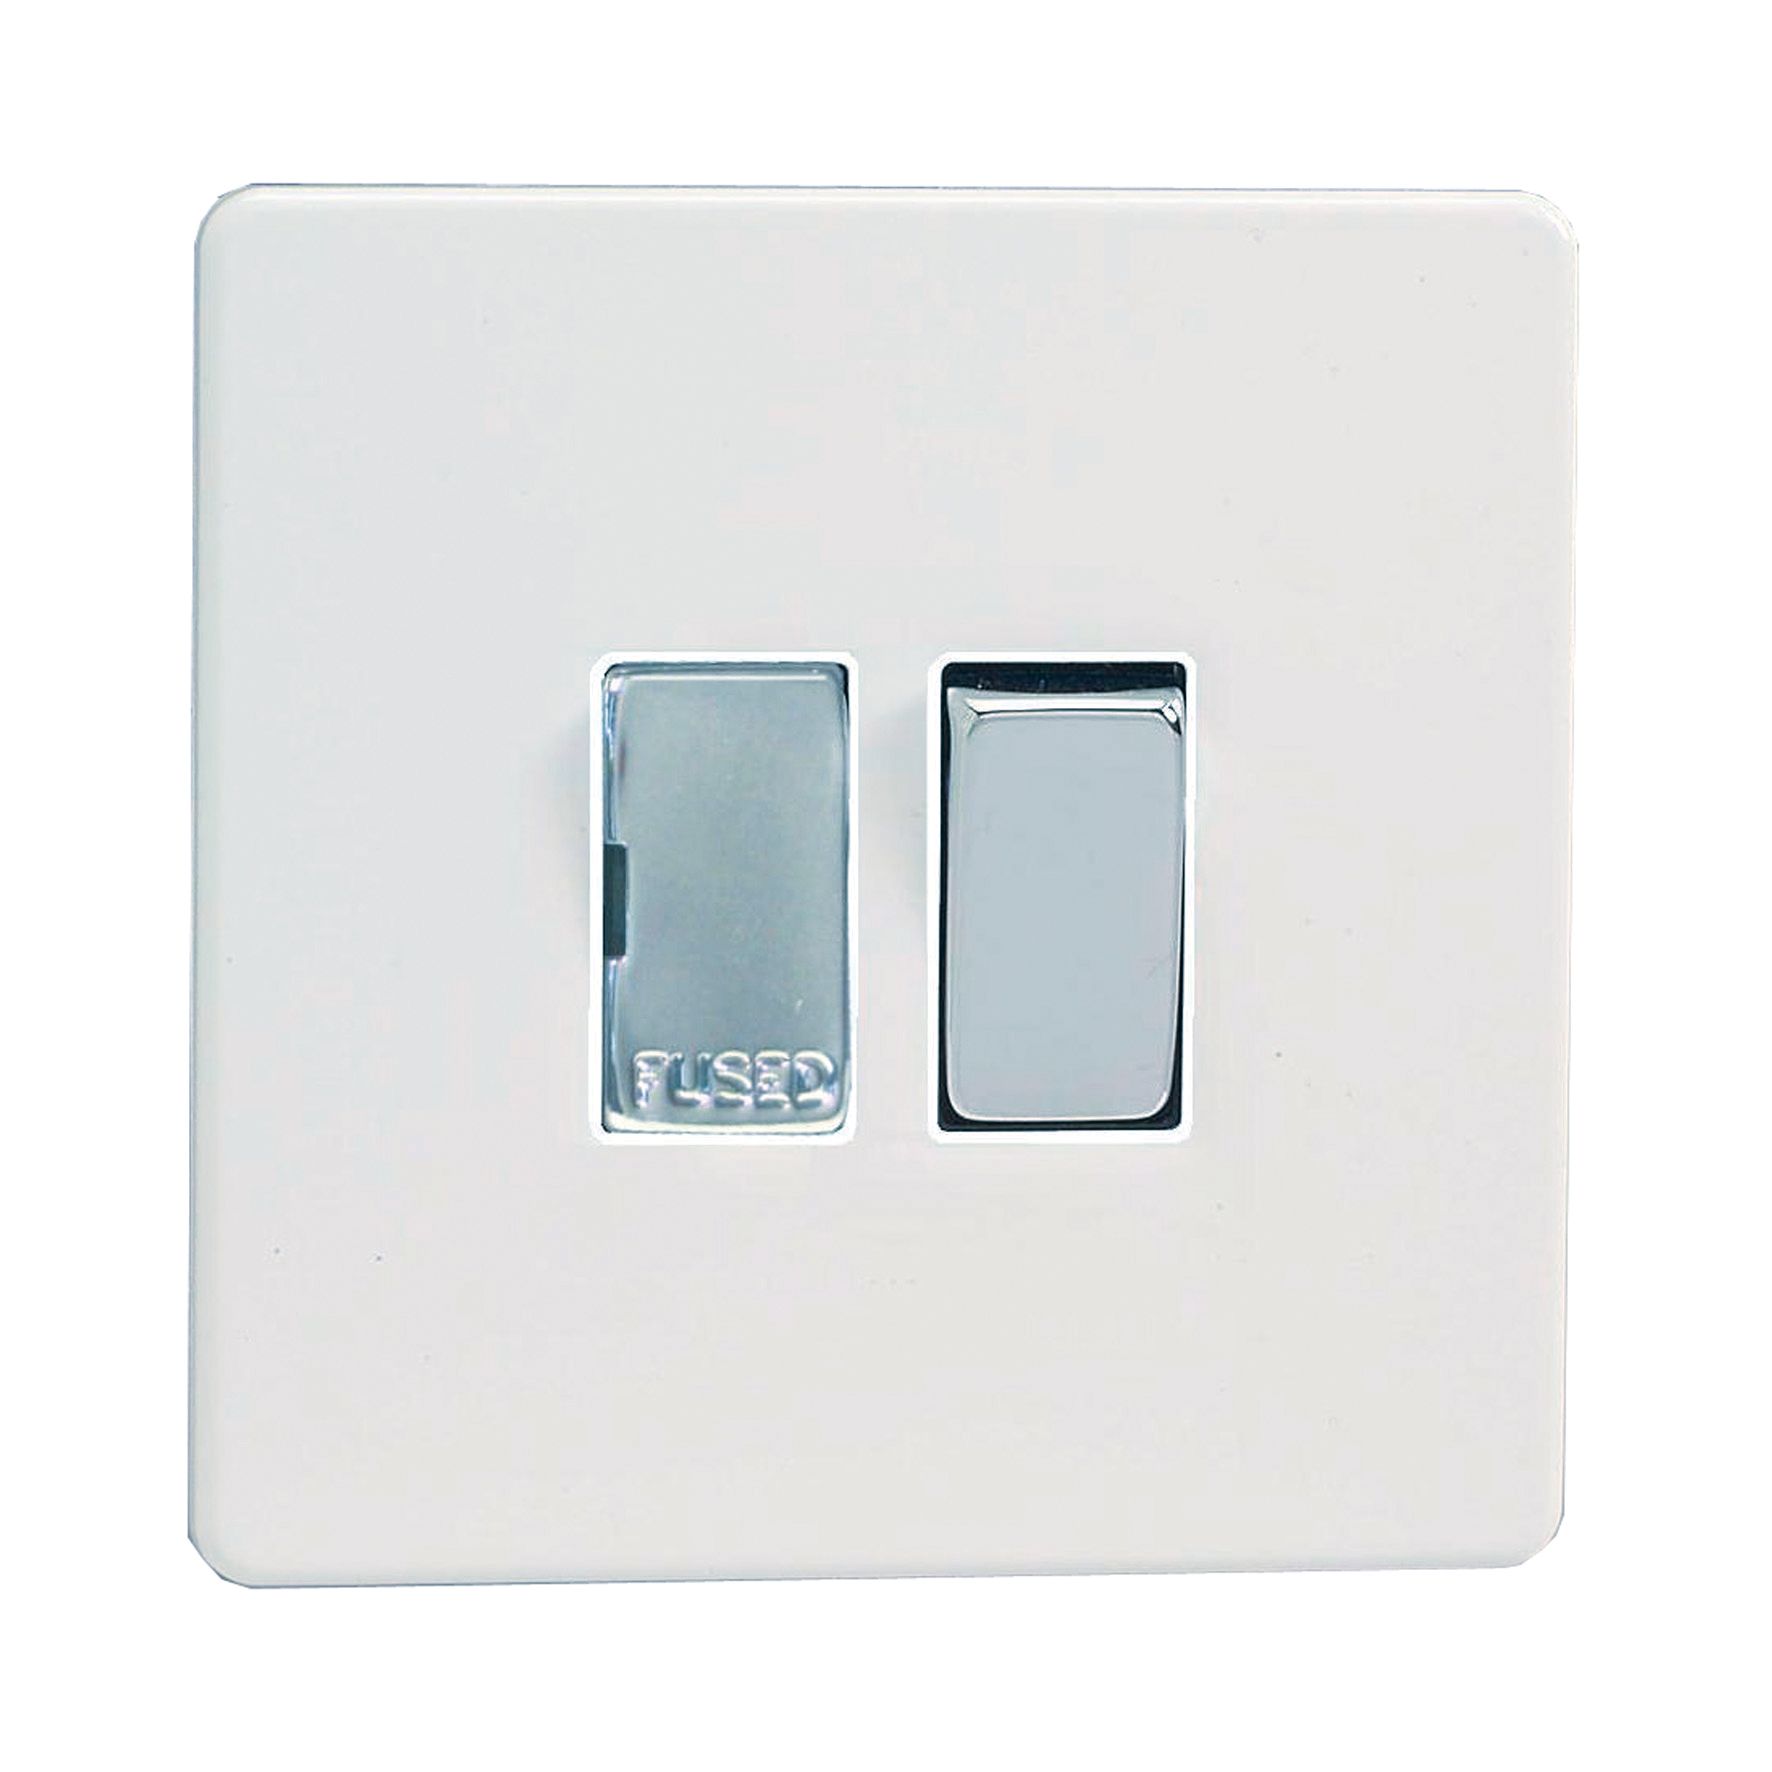 Varilight White 13A Flat profile Screwless Switched Fused connection unit